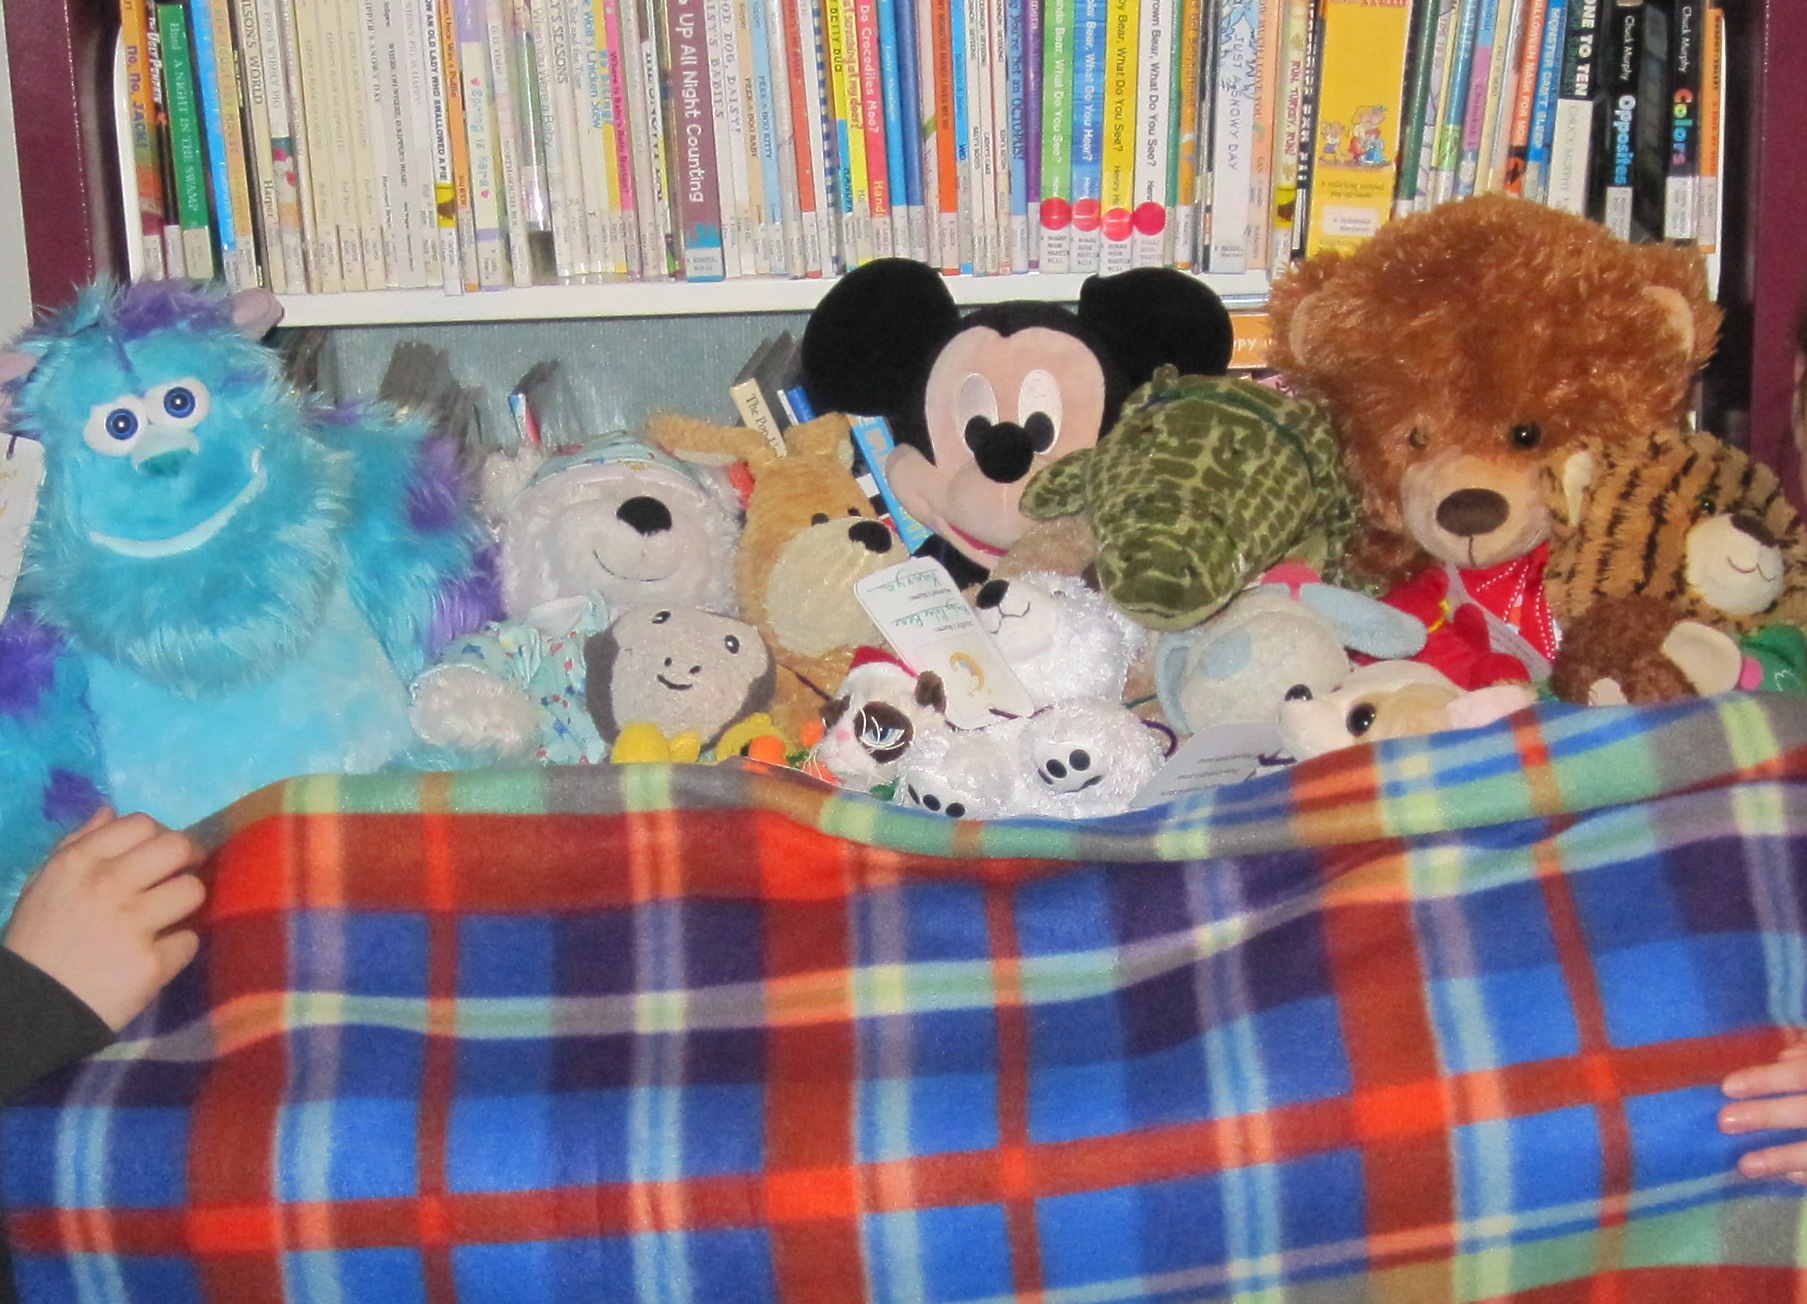 All the stuffies tucked in for a night at the library!